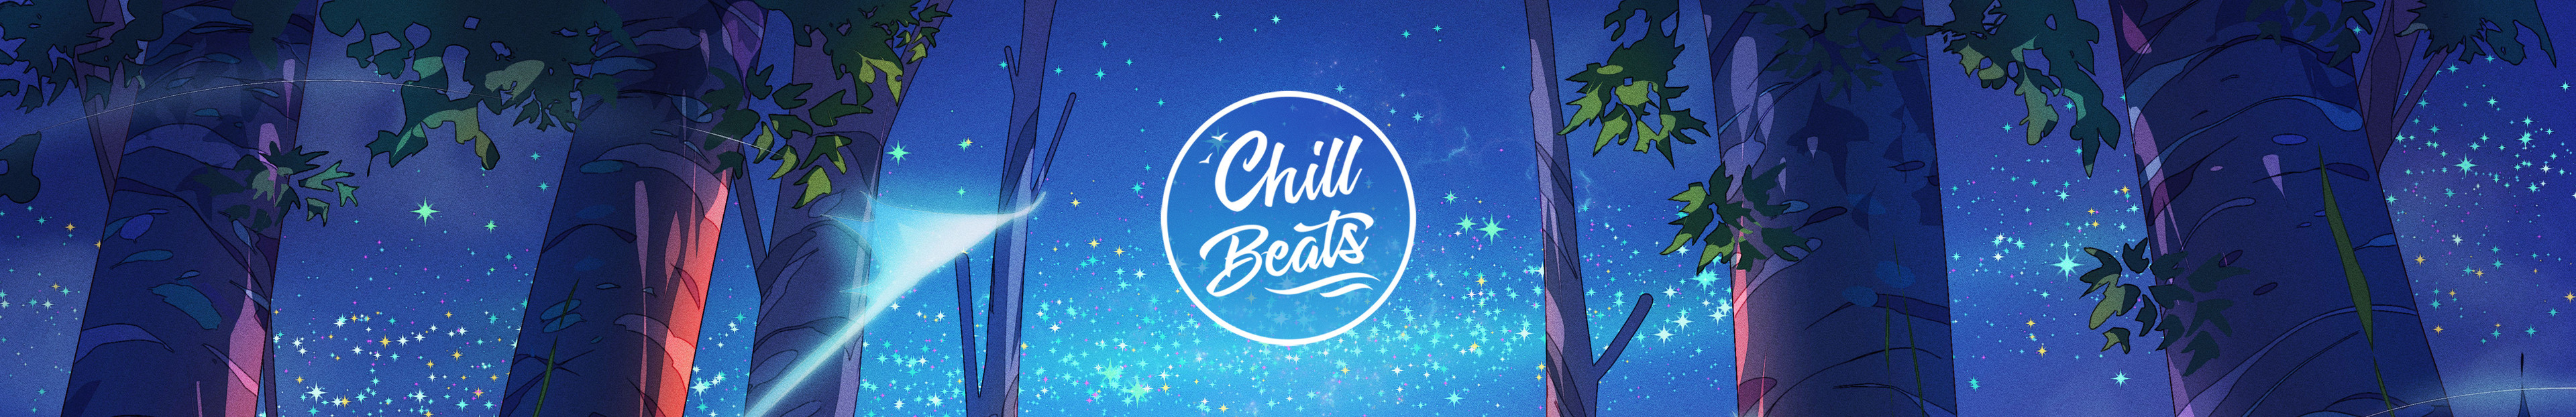 Cover Illustrations for Chill Beats Records and the various music artists in collaboration
